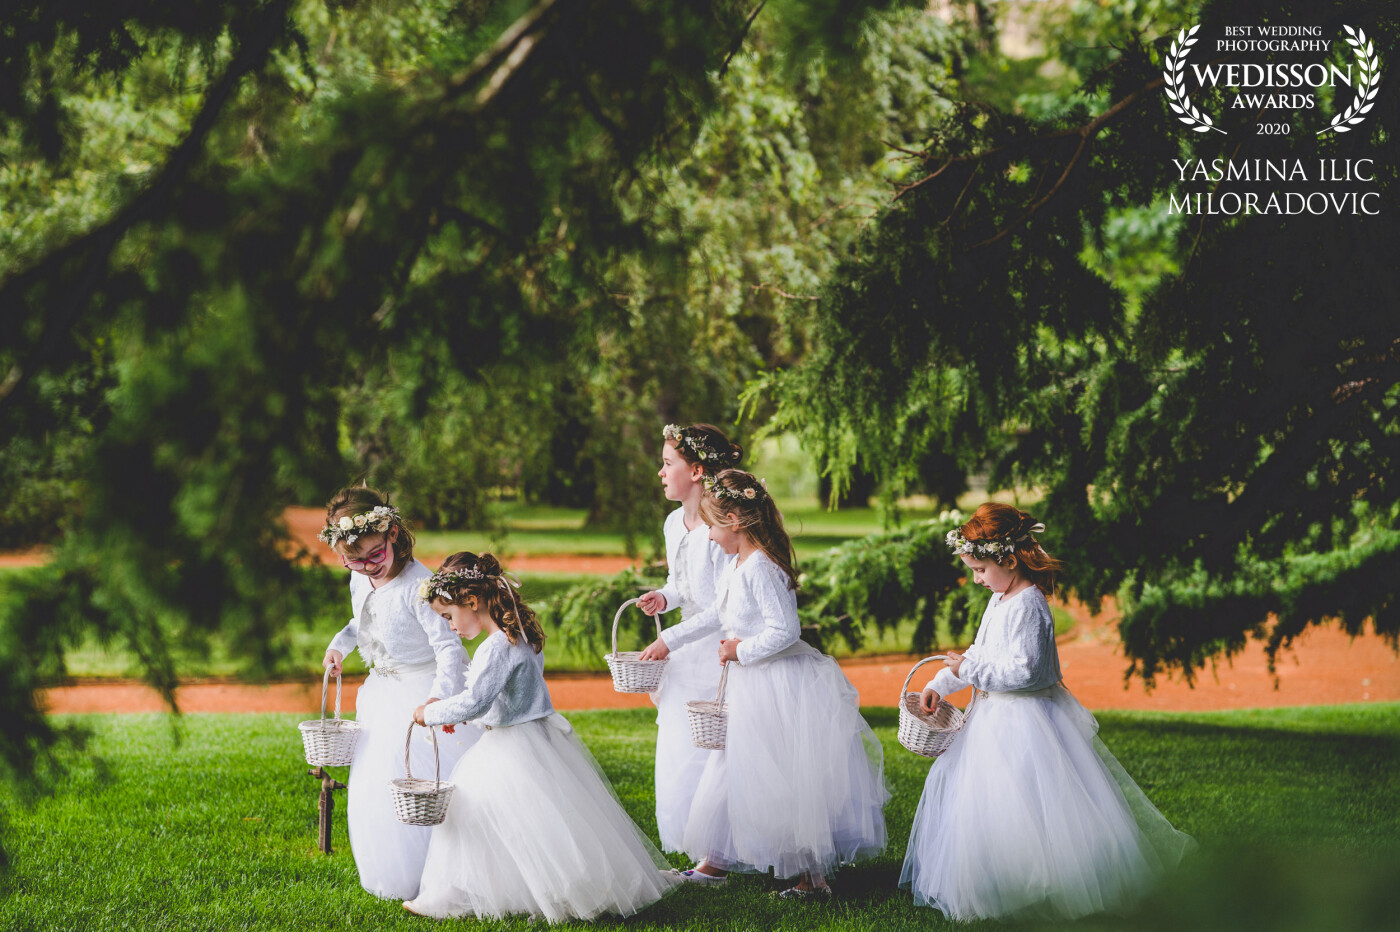 These 5 adorable flower girls walked down the aisle and then collectively walked back towards the bride. This was at Bendooley Estate in Berrima, Australia.